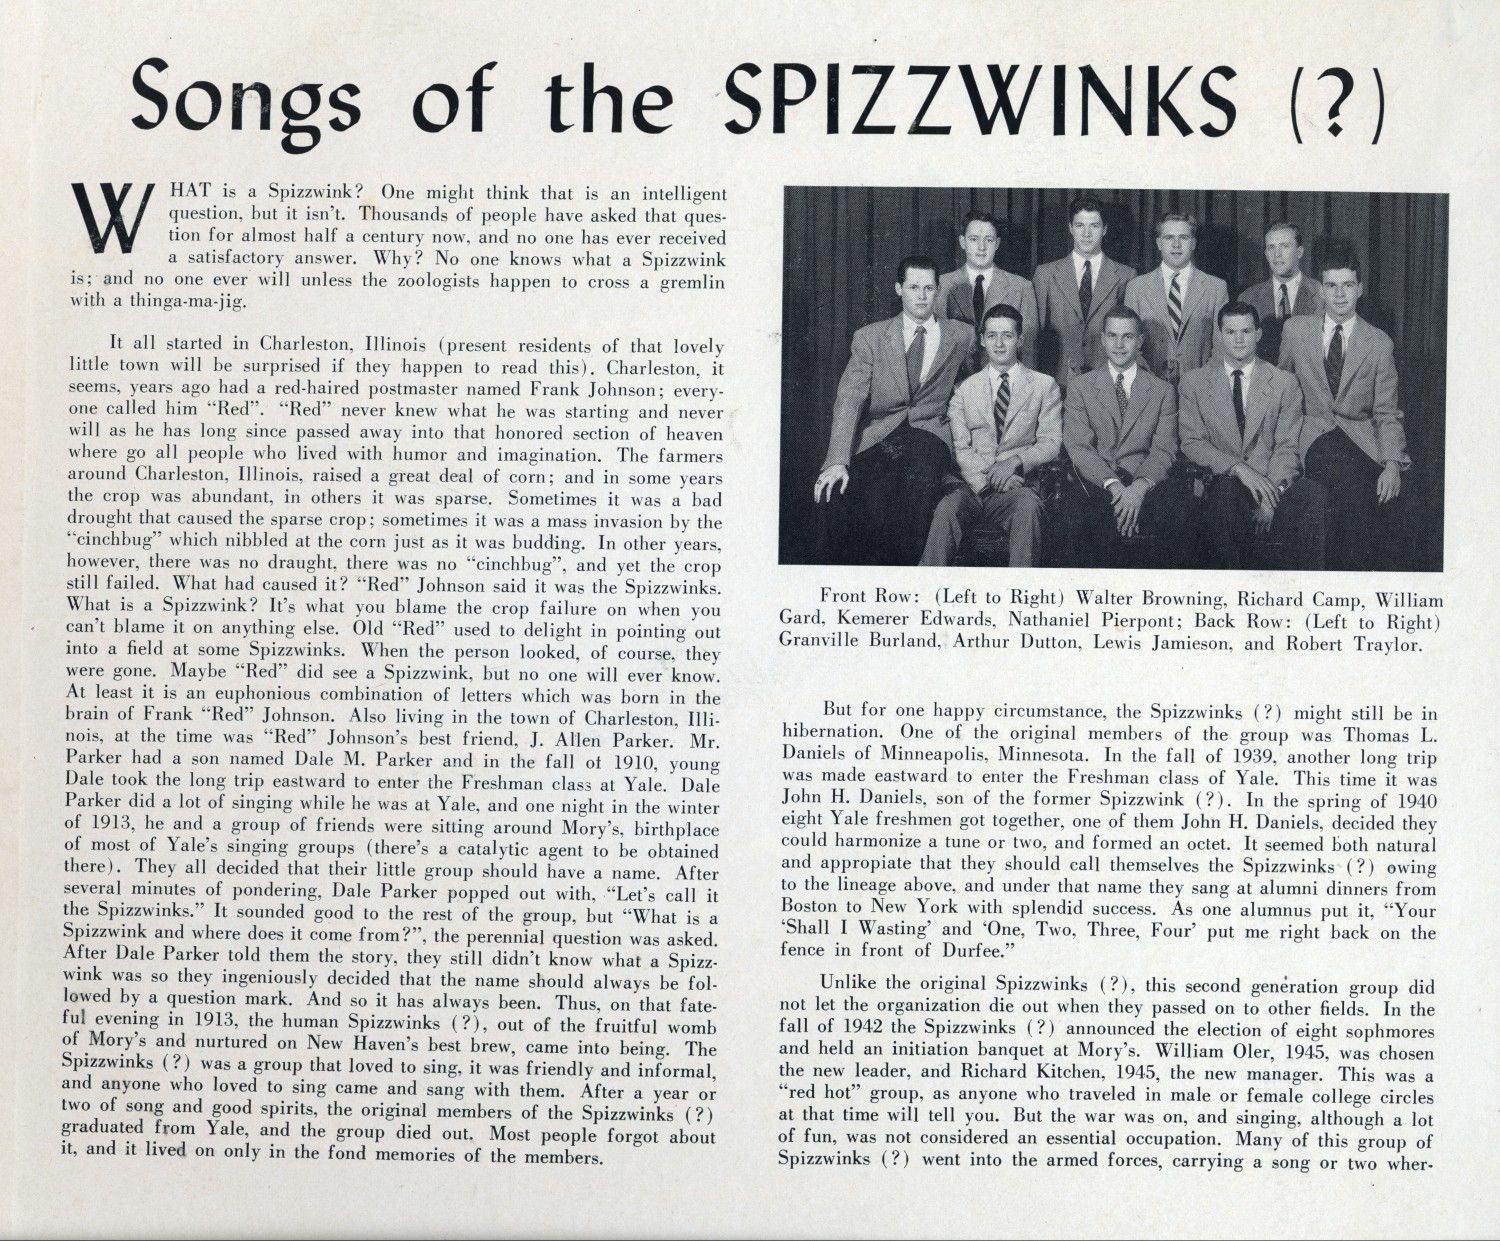 1948 Songs of the Spizzwinks - inside cover left